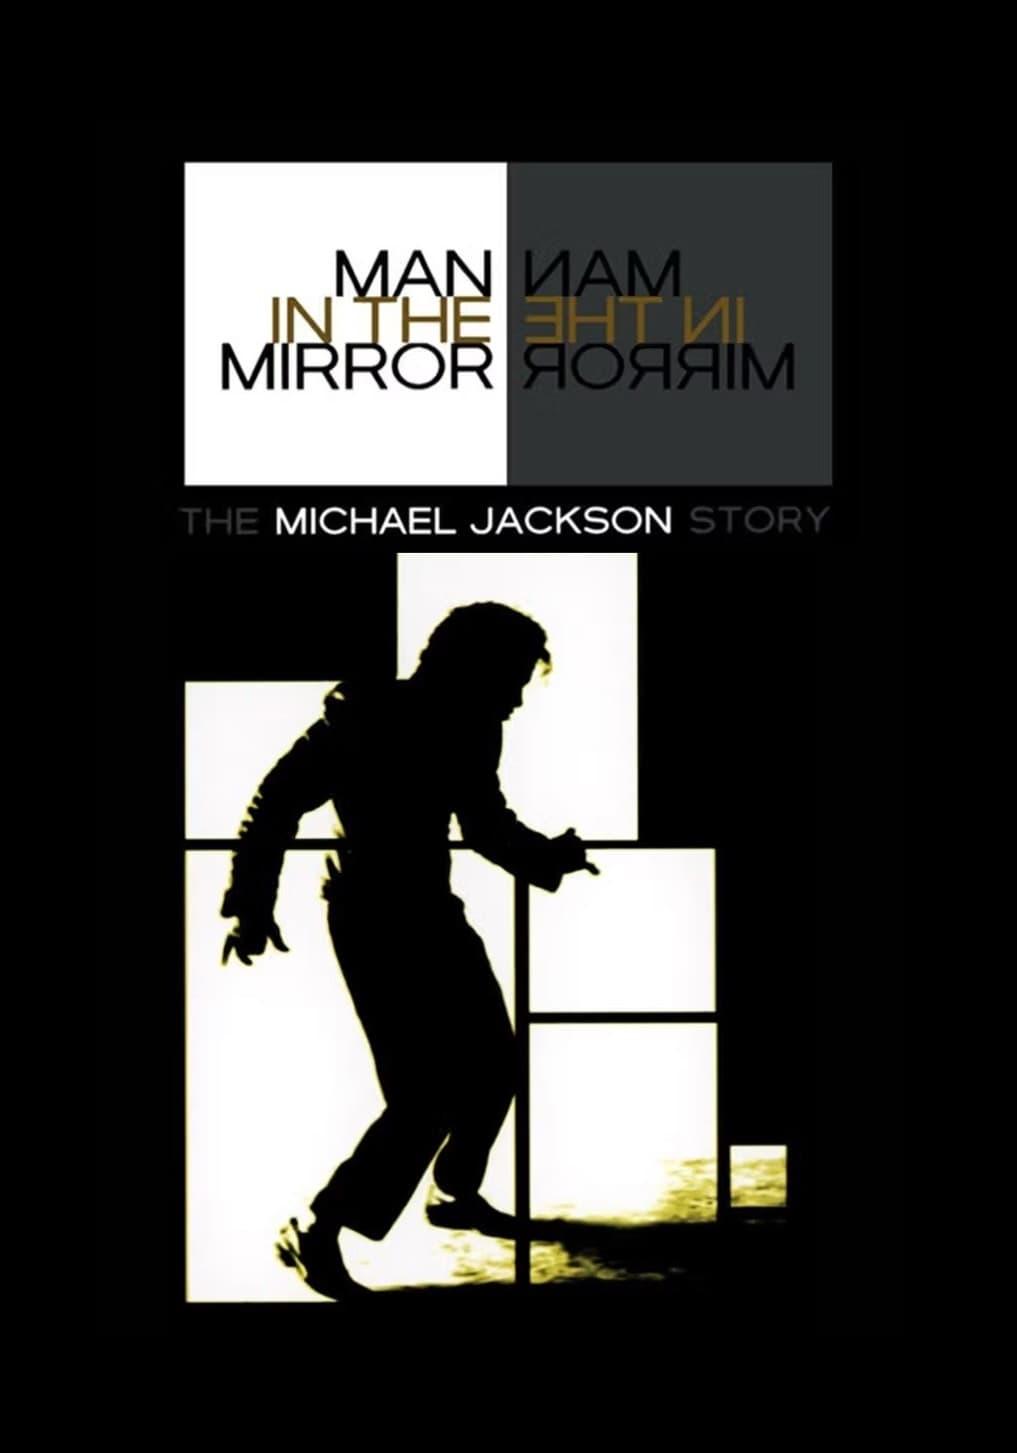 Man in the Mirror: The Michael Jackson Story poster